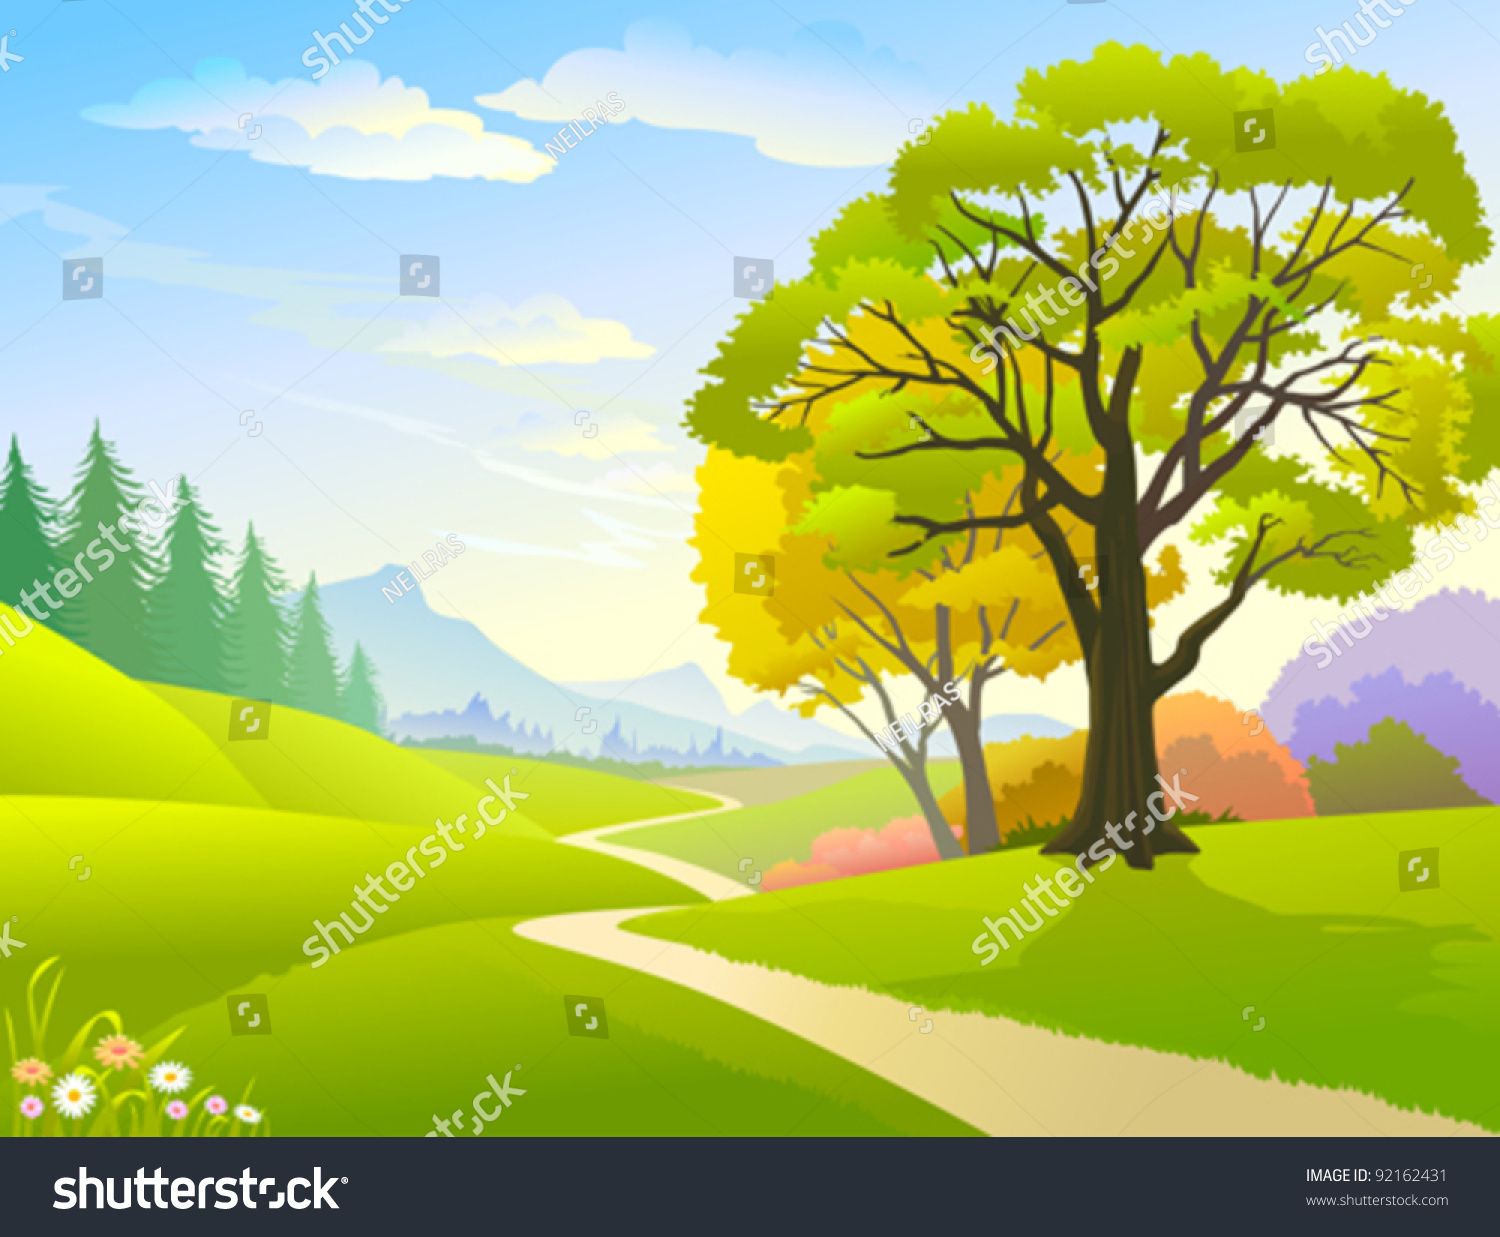 Country Side Trees Hills Lonely Pathway Stock Vector (Royalty Free ...